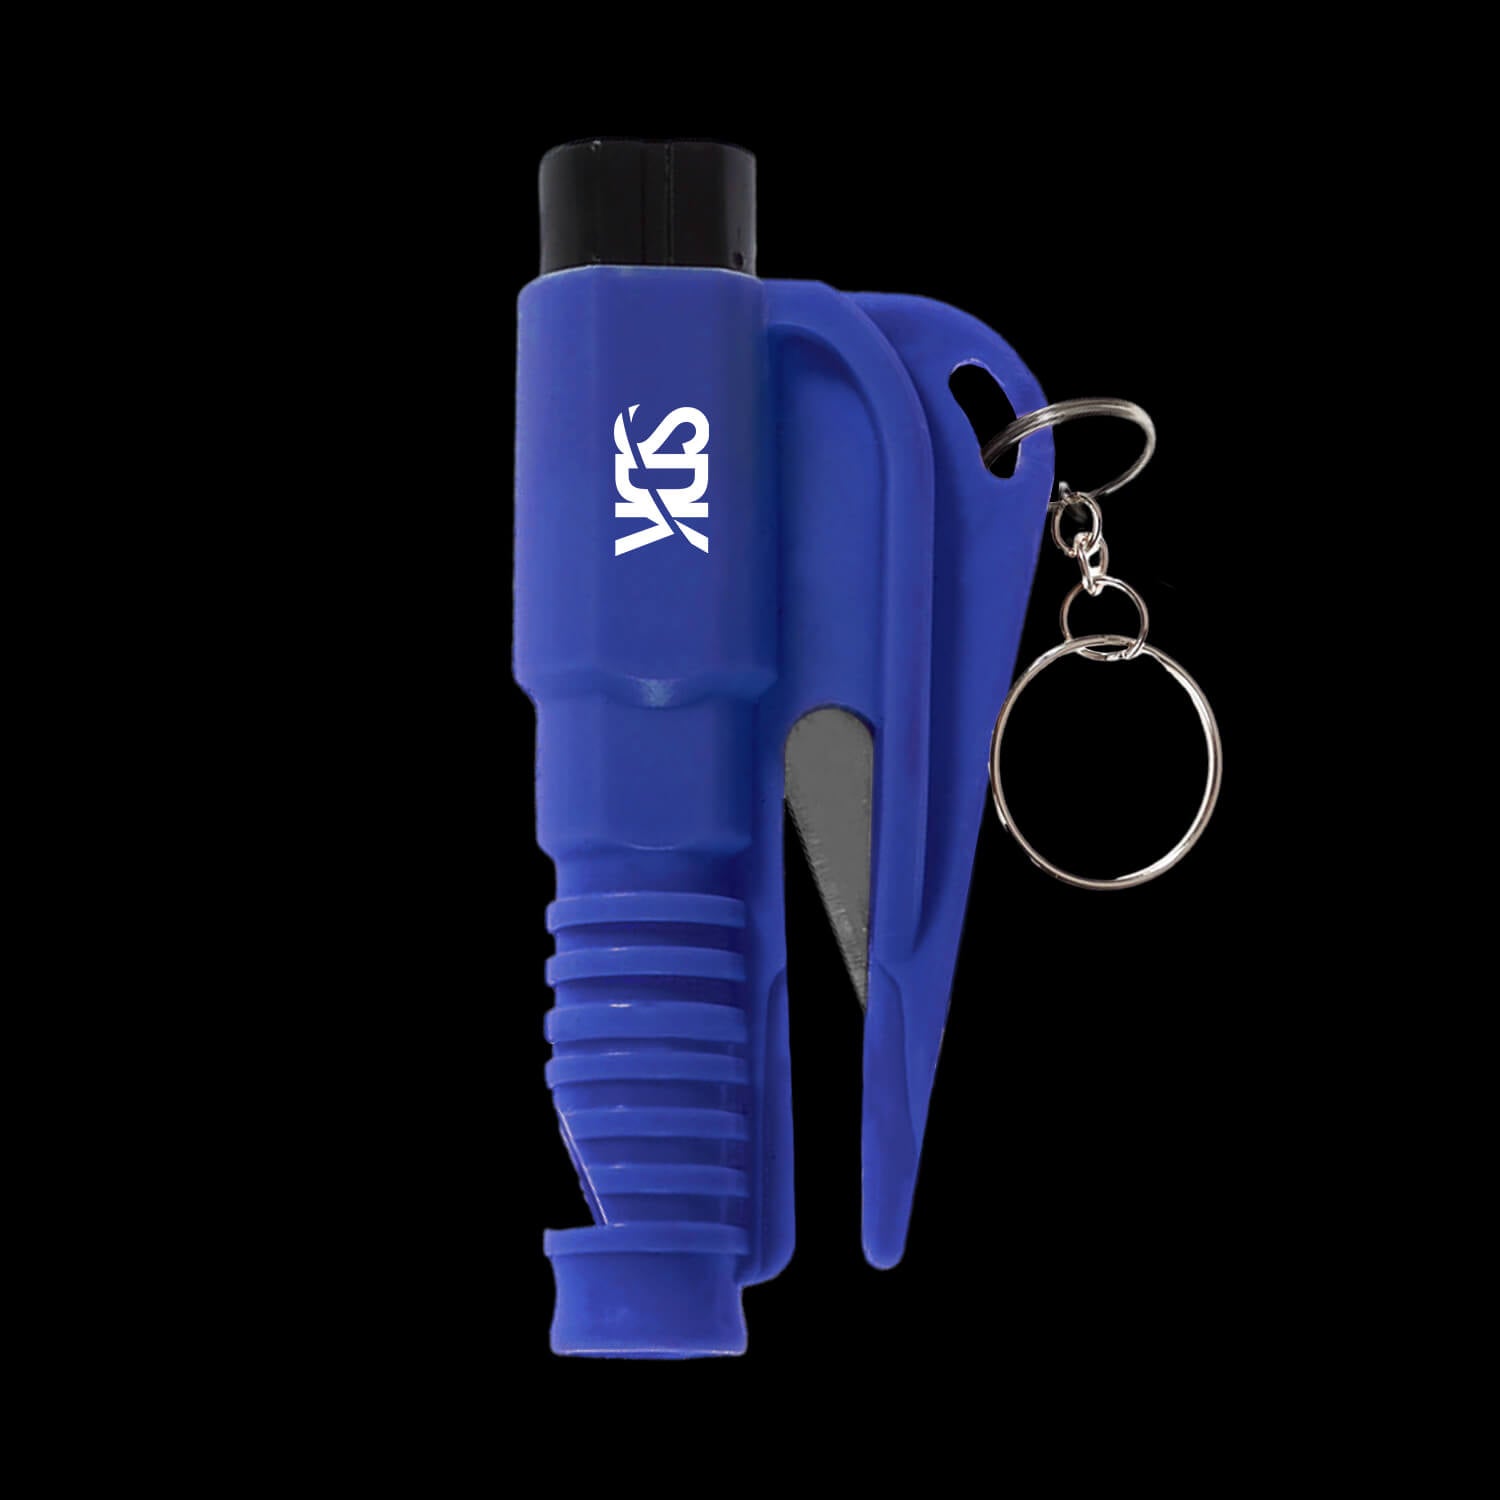 SDK Kit Blue Escape Tool (all-in-one seat belt cutter, window breaker and whistle)